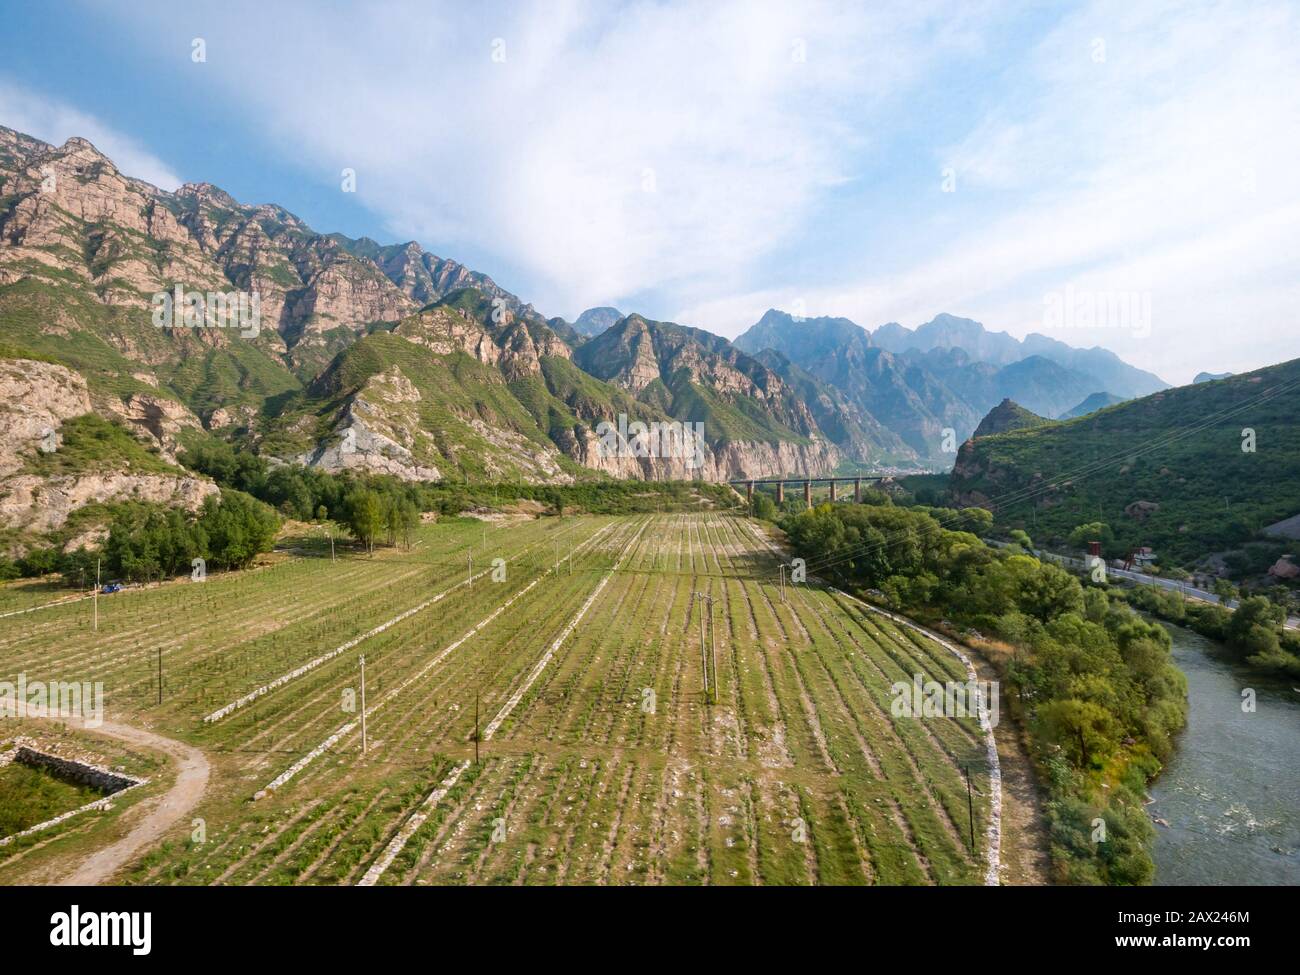 Mountains and agricultural scenery seen from Trans-Mongolian Express train window, China, Asia Stock Photo